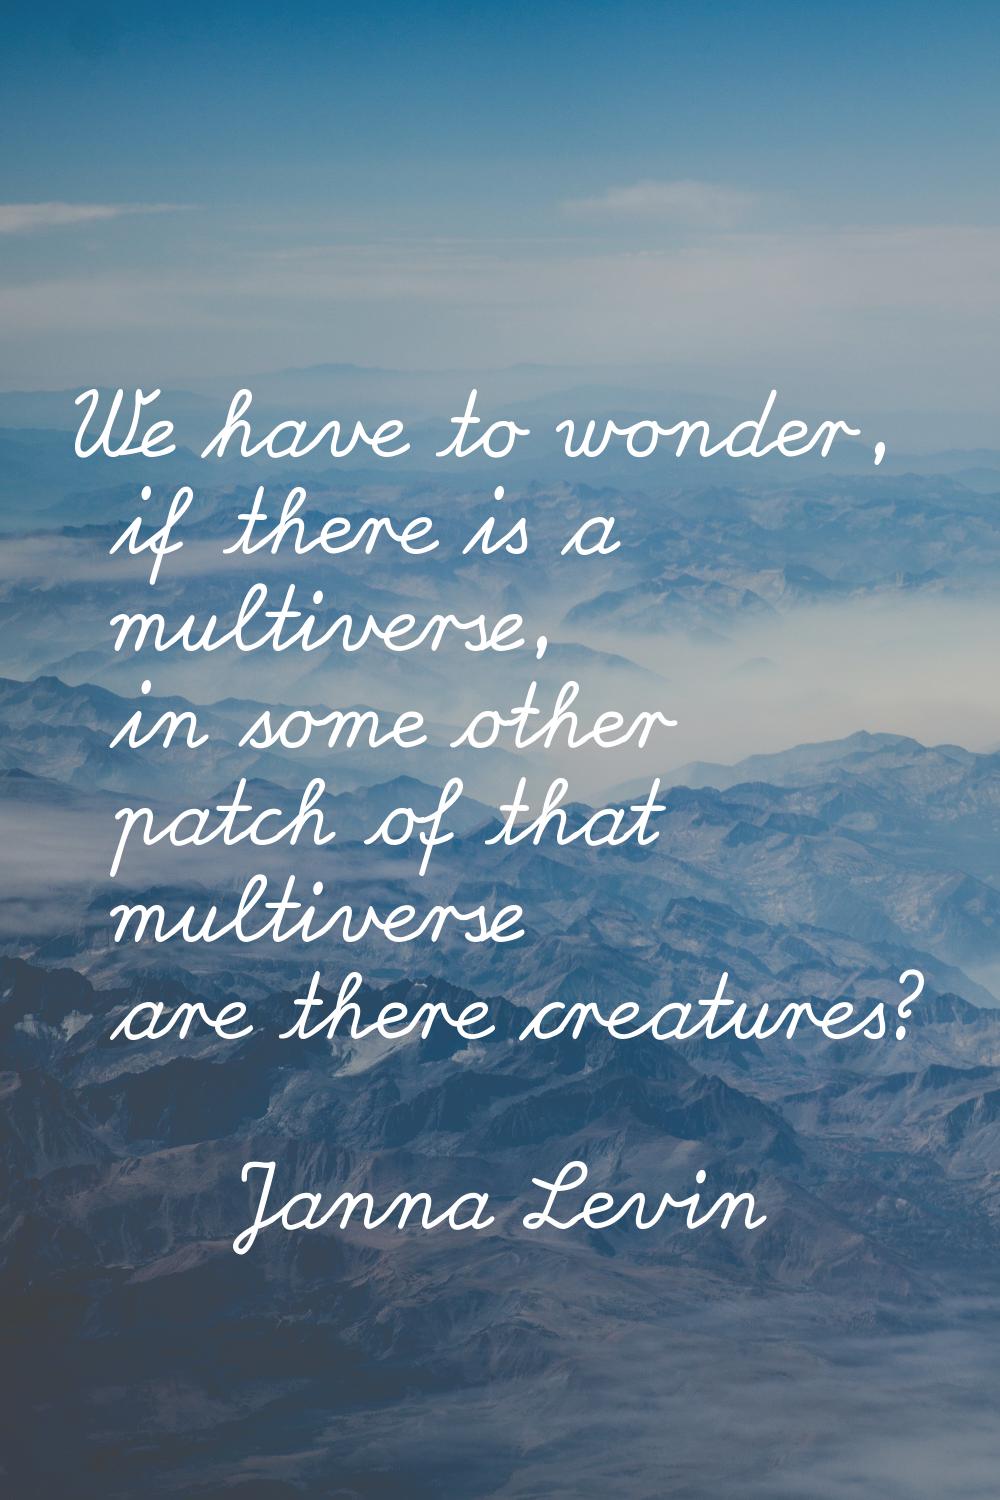 We have to wonder, if there is a multiverse, in some other patch of that multiverse are there creat